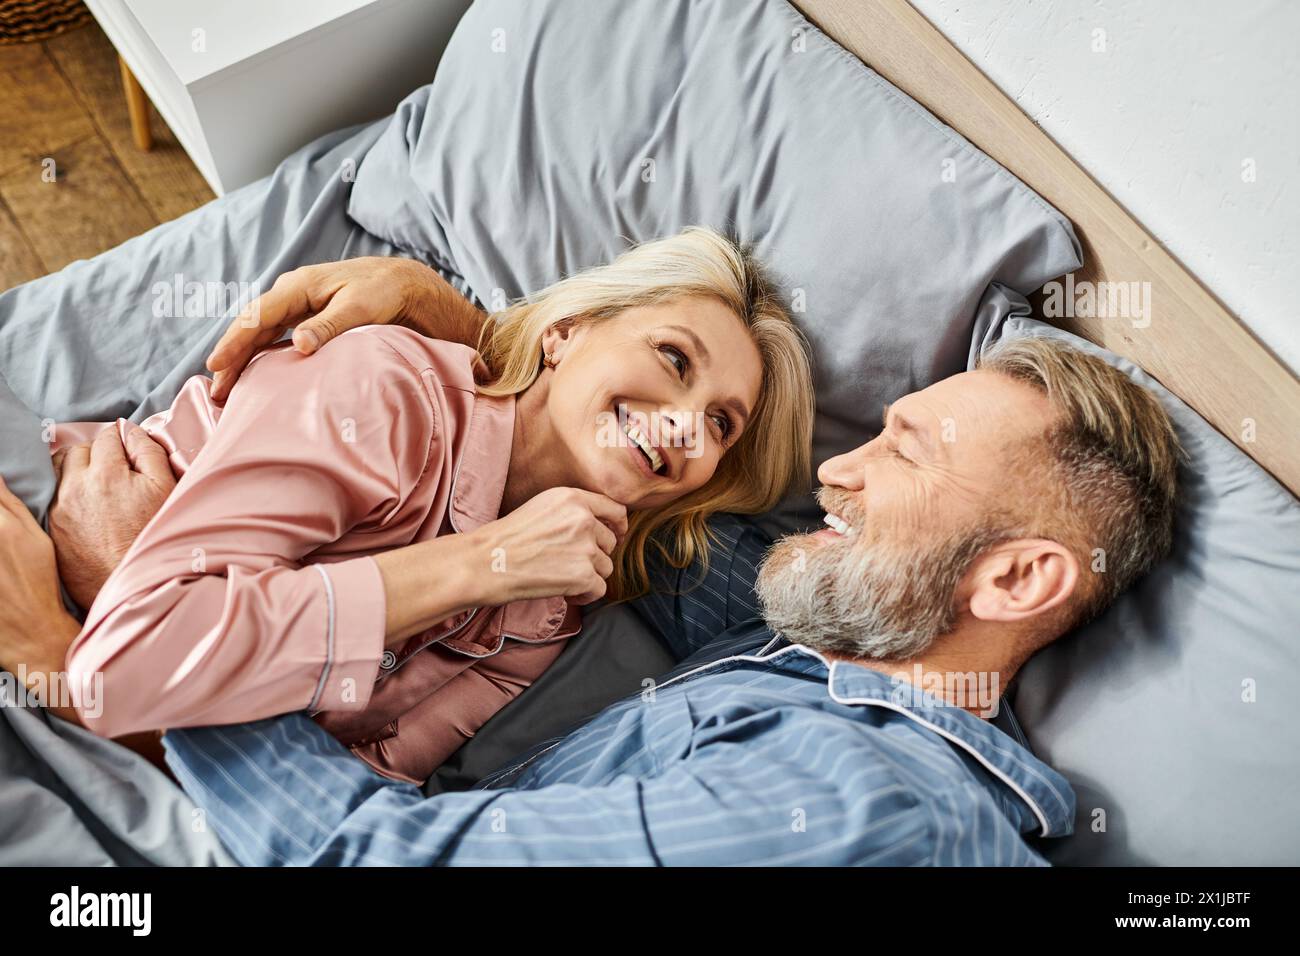 A mature loving couple in cozy homewear laying together on a bed, sharing a peaceful moment of intimacy and connection. Stock Photo